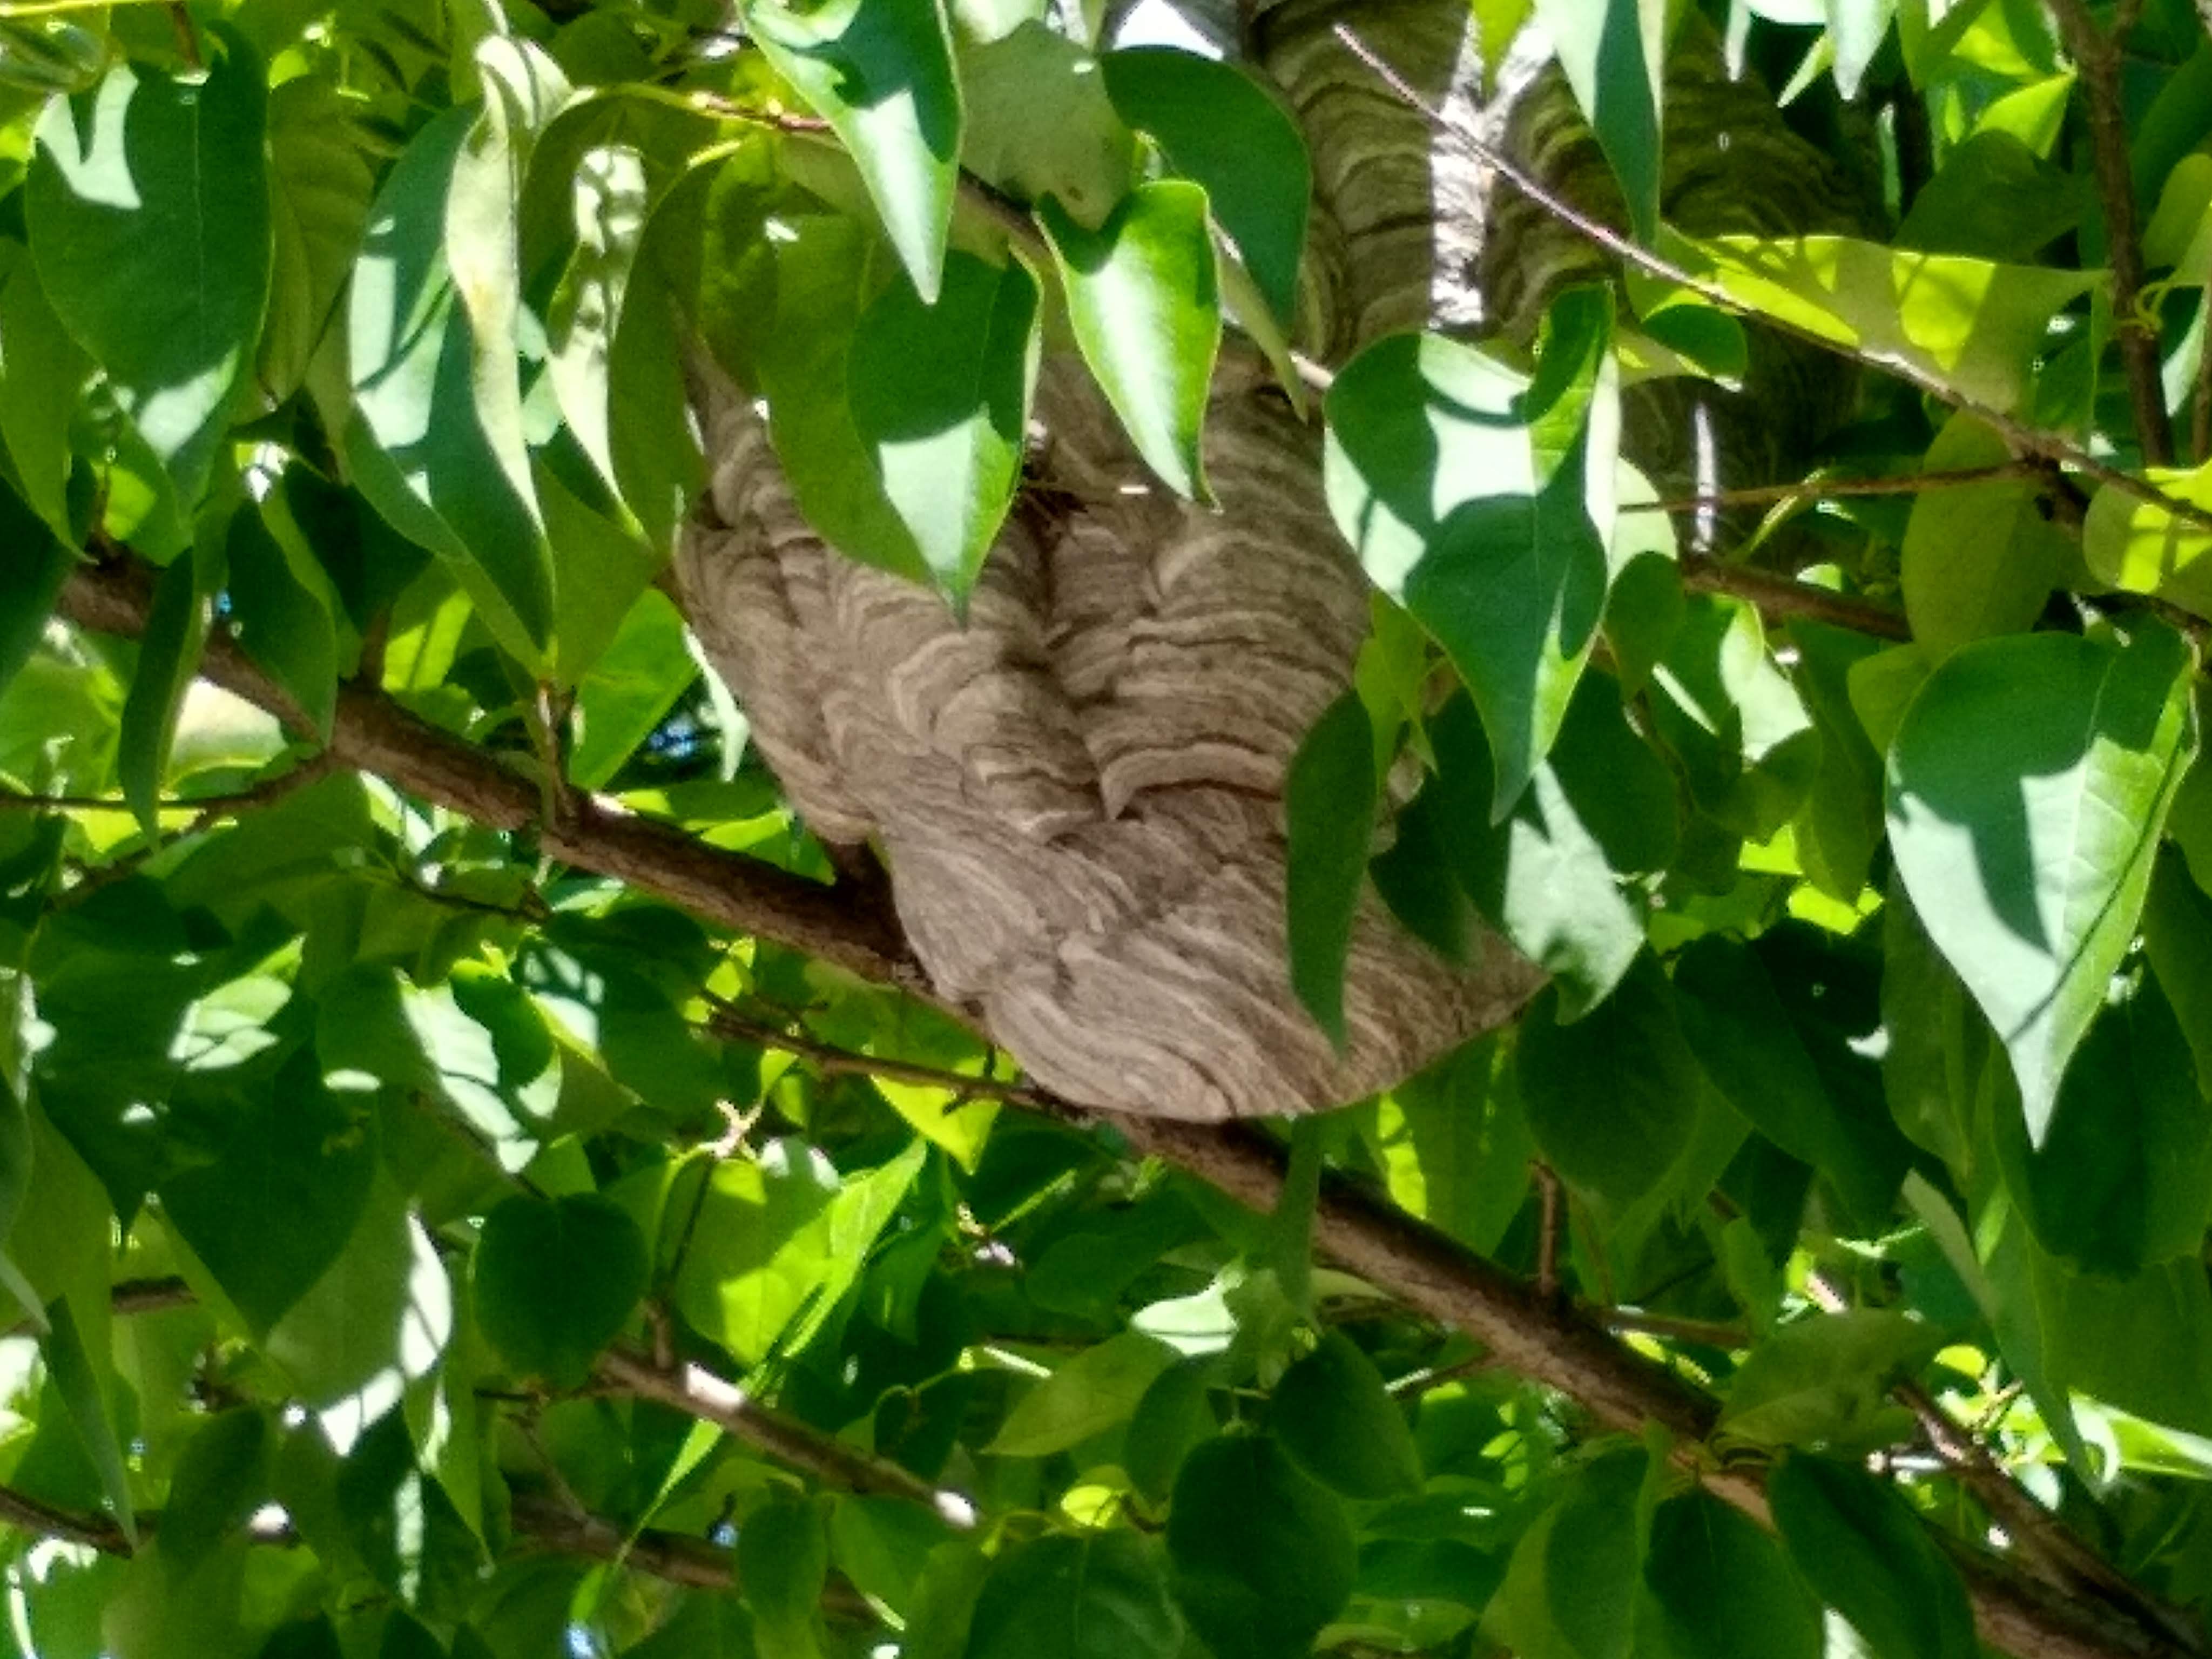 A large wasp nest in a tree.